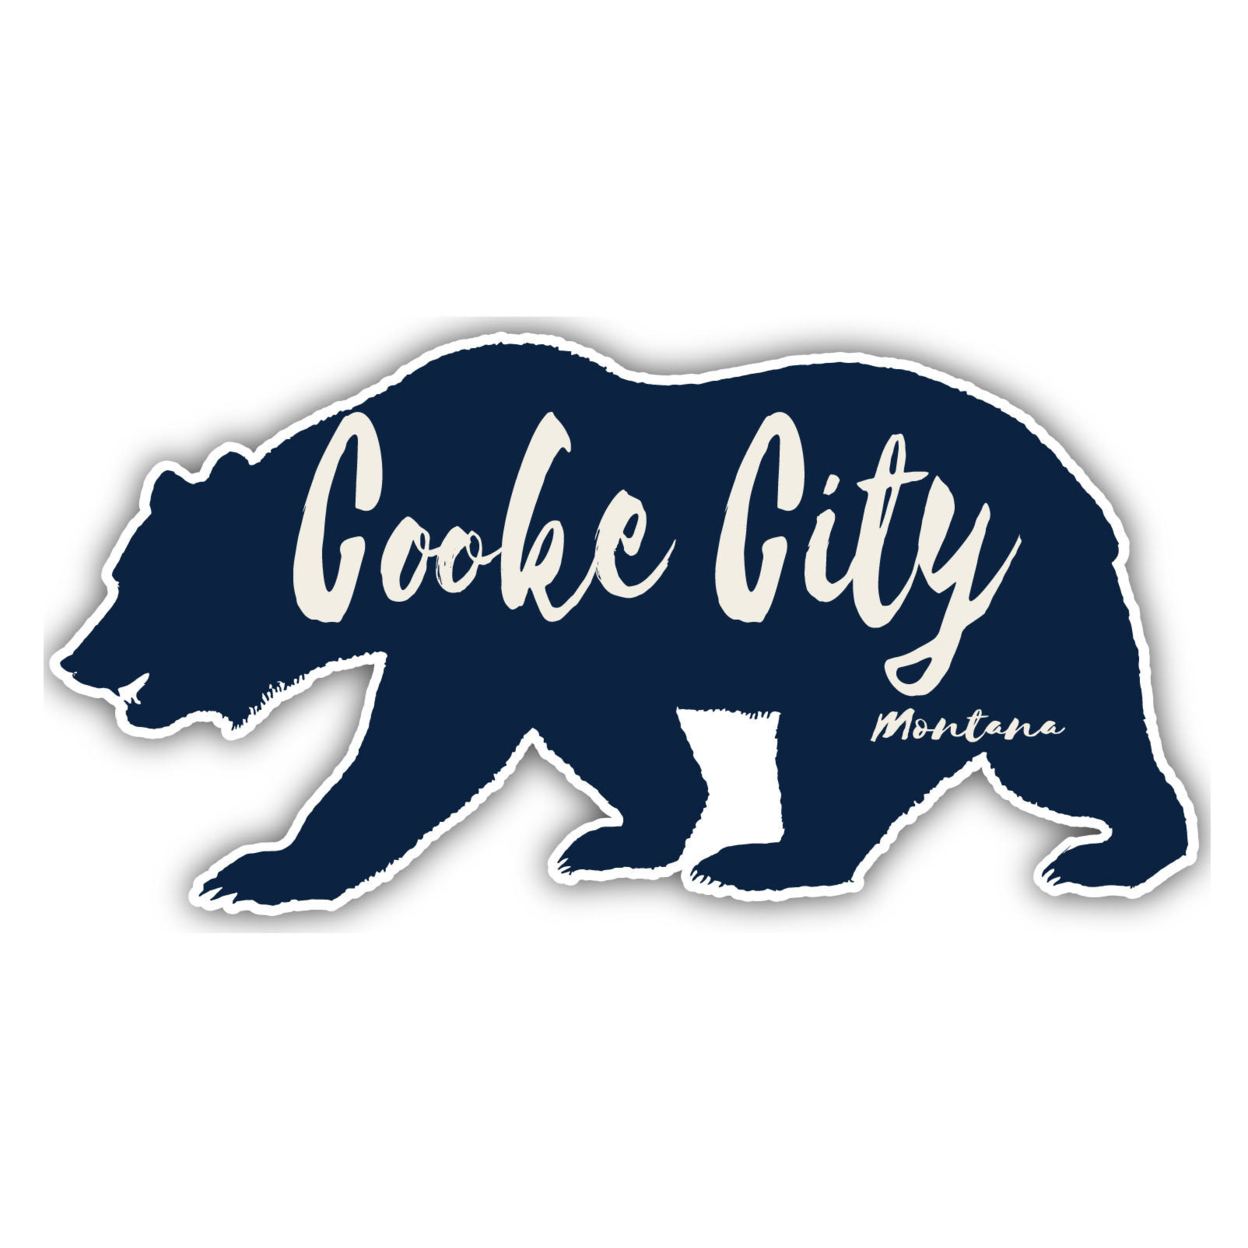 Cooke City Montana Souvenir Decorative Stickers (Choose Theme And Size) - 4-Pack, 4-Inch, Great Outdoors